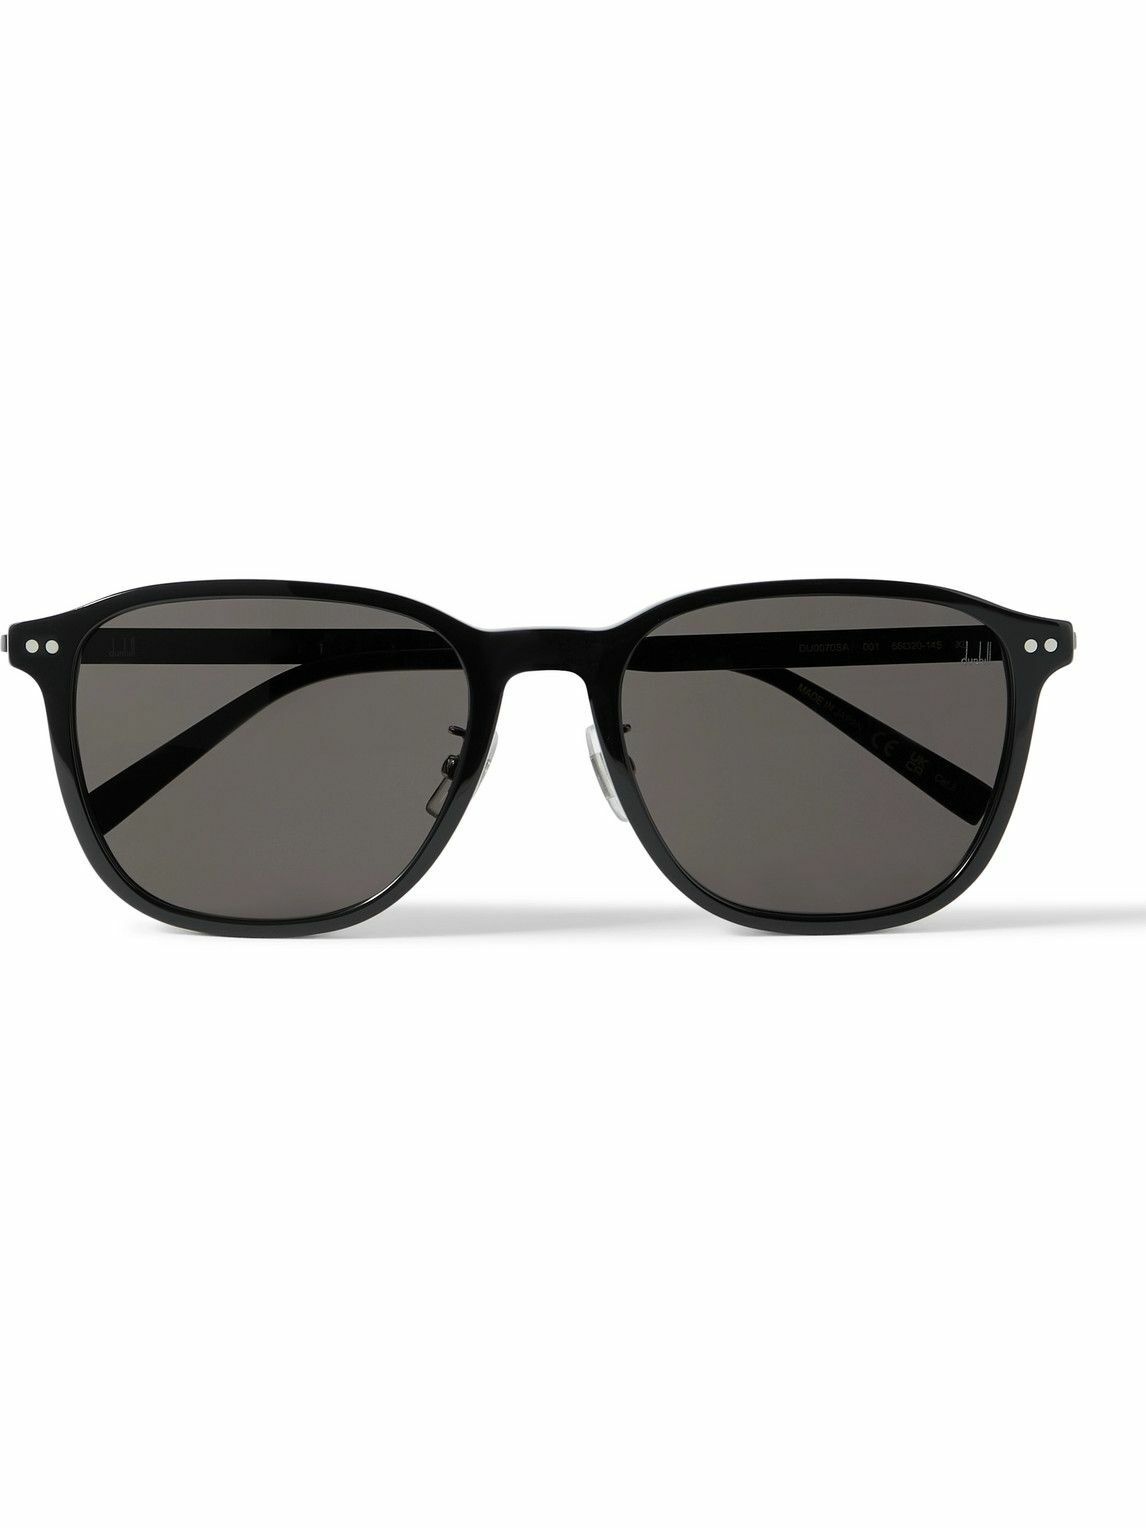 Dunhill - Round-Frame Acetate Sunglasses Dunhill